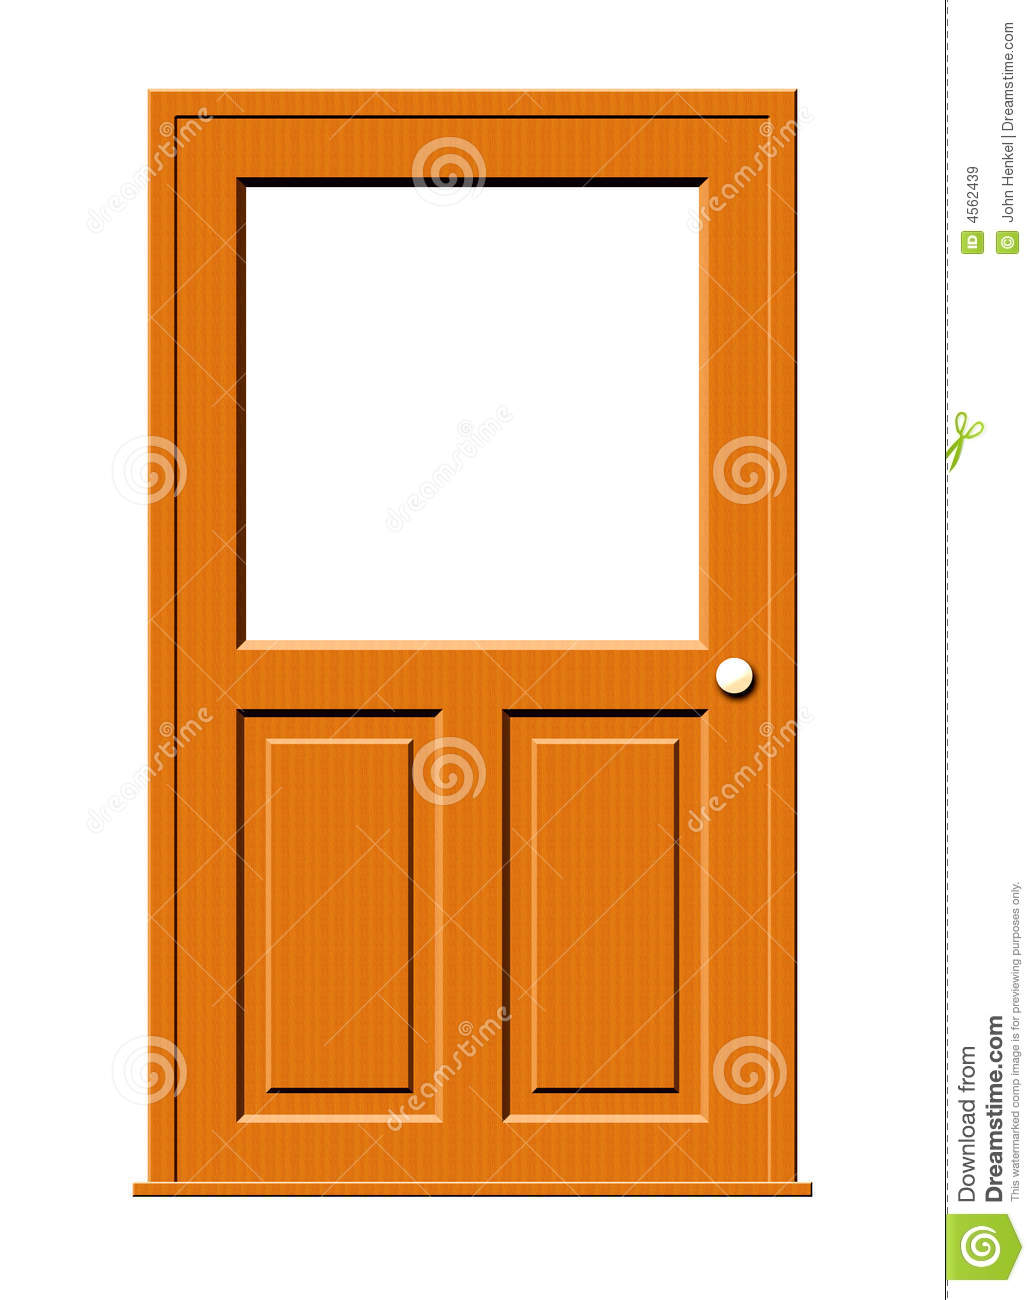 Wood Door With Blank Window Royalty Free Stock Images   Image  4562439